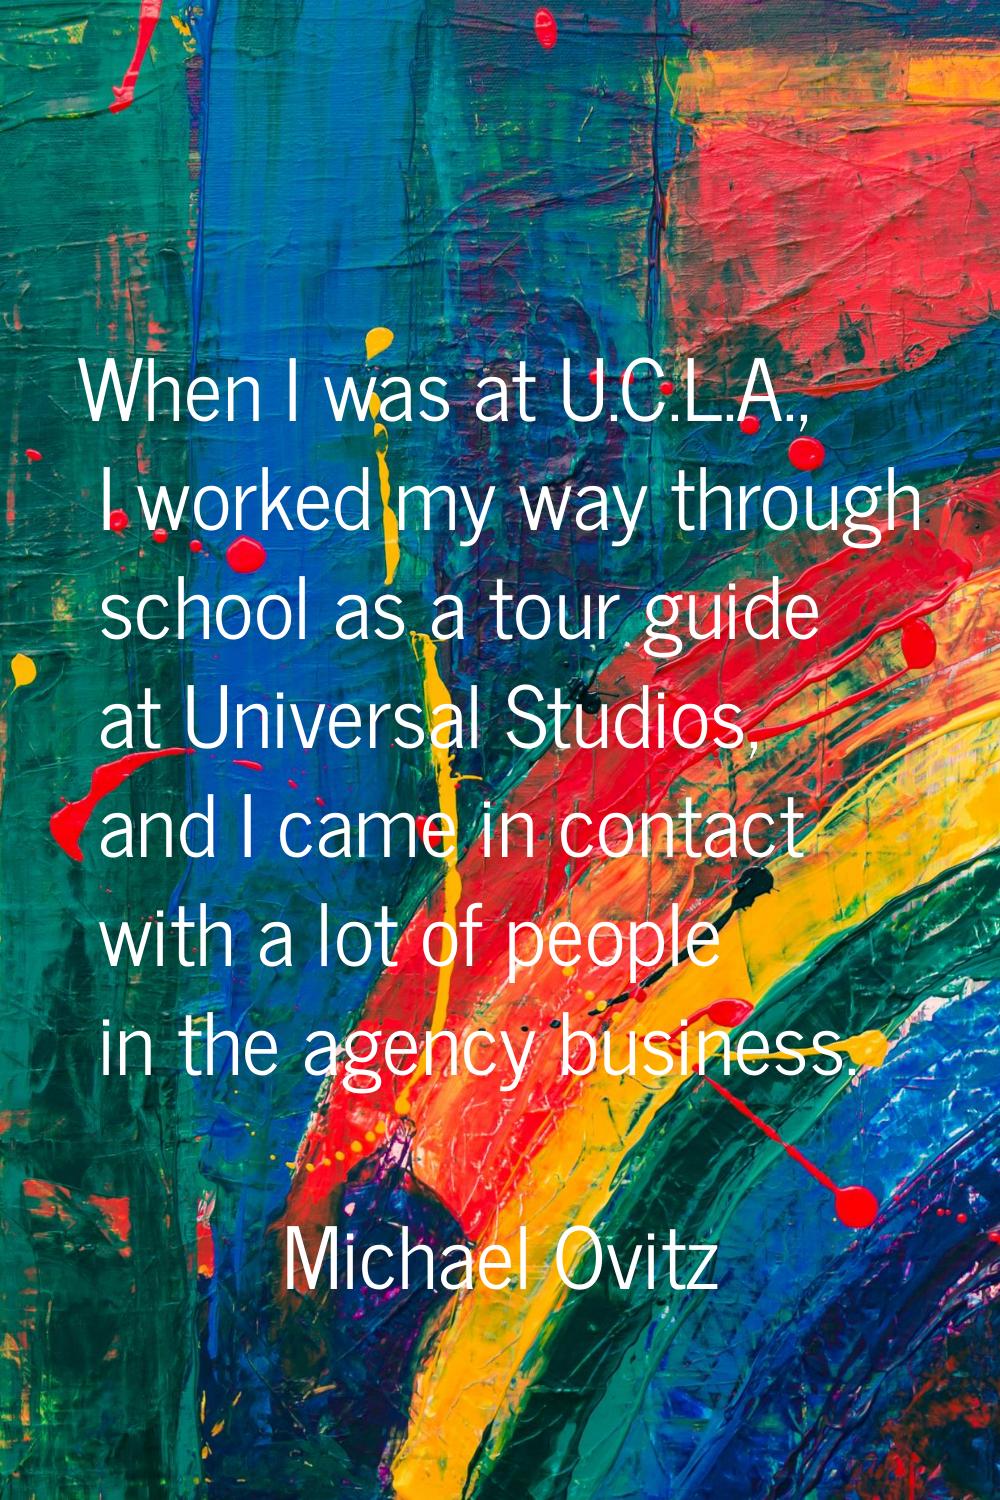 When I was at U.C.L.A., I worked my way through school as a tour guide at Universal Studios, and I 